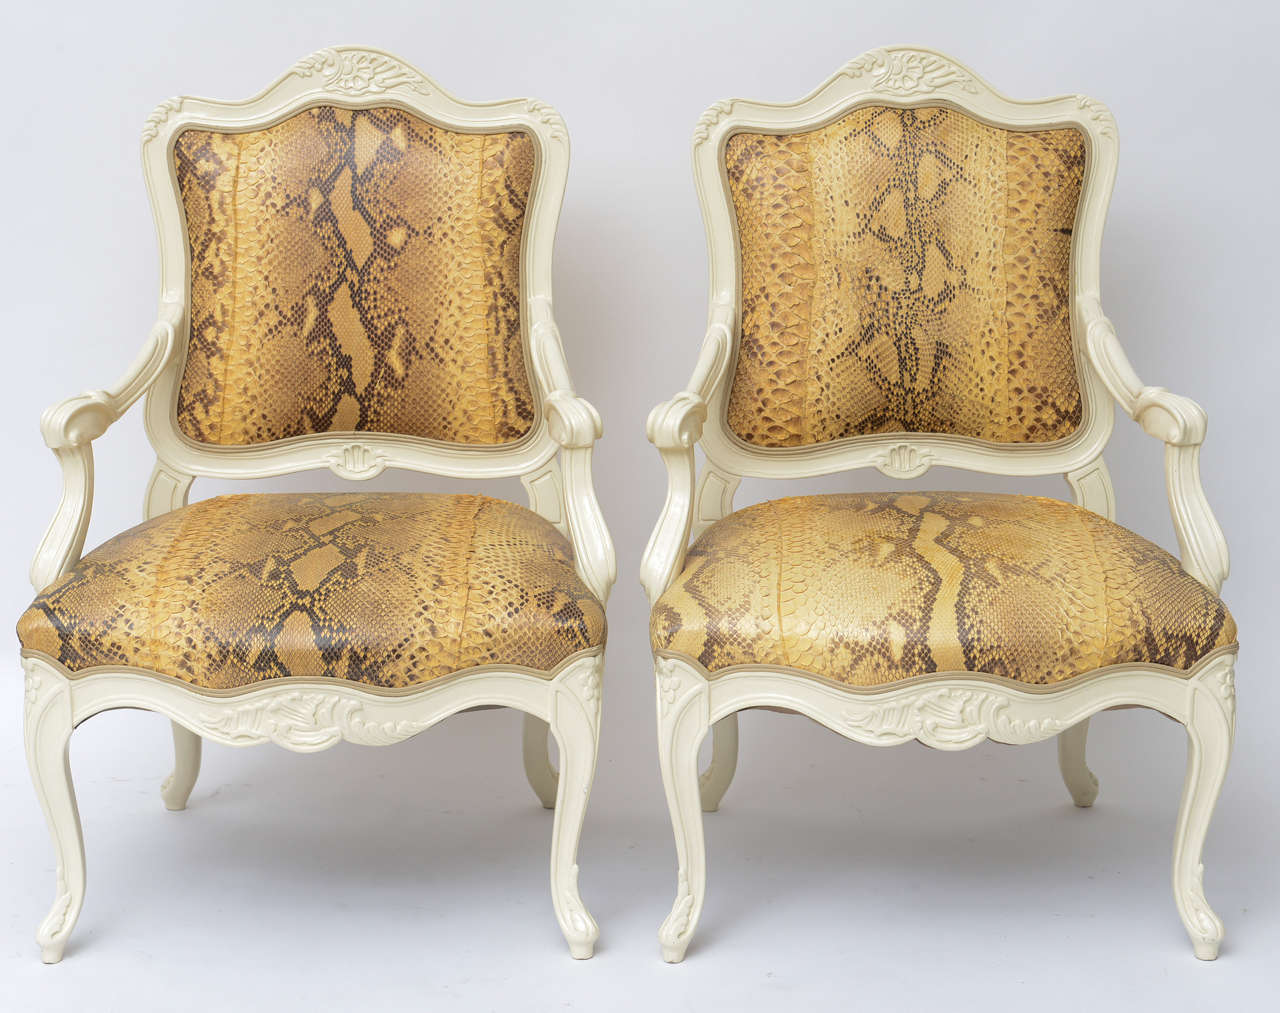 Fabulous pair of cream lacquered Louis XV-style armchairs (likely circa 1970) are taken to another level with gorgeous, glamorous, genuine python upholstery, as found. Delicate double welting in beige leather. Price listed is 